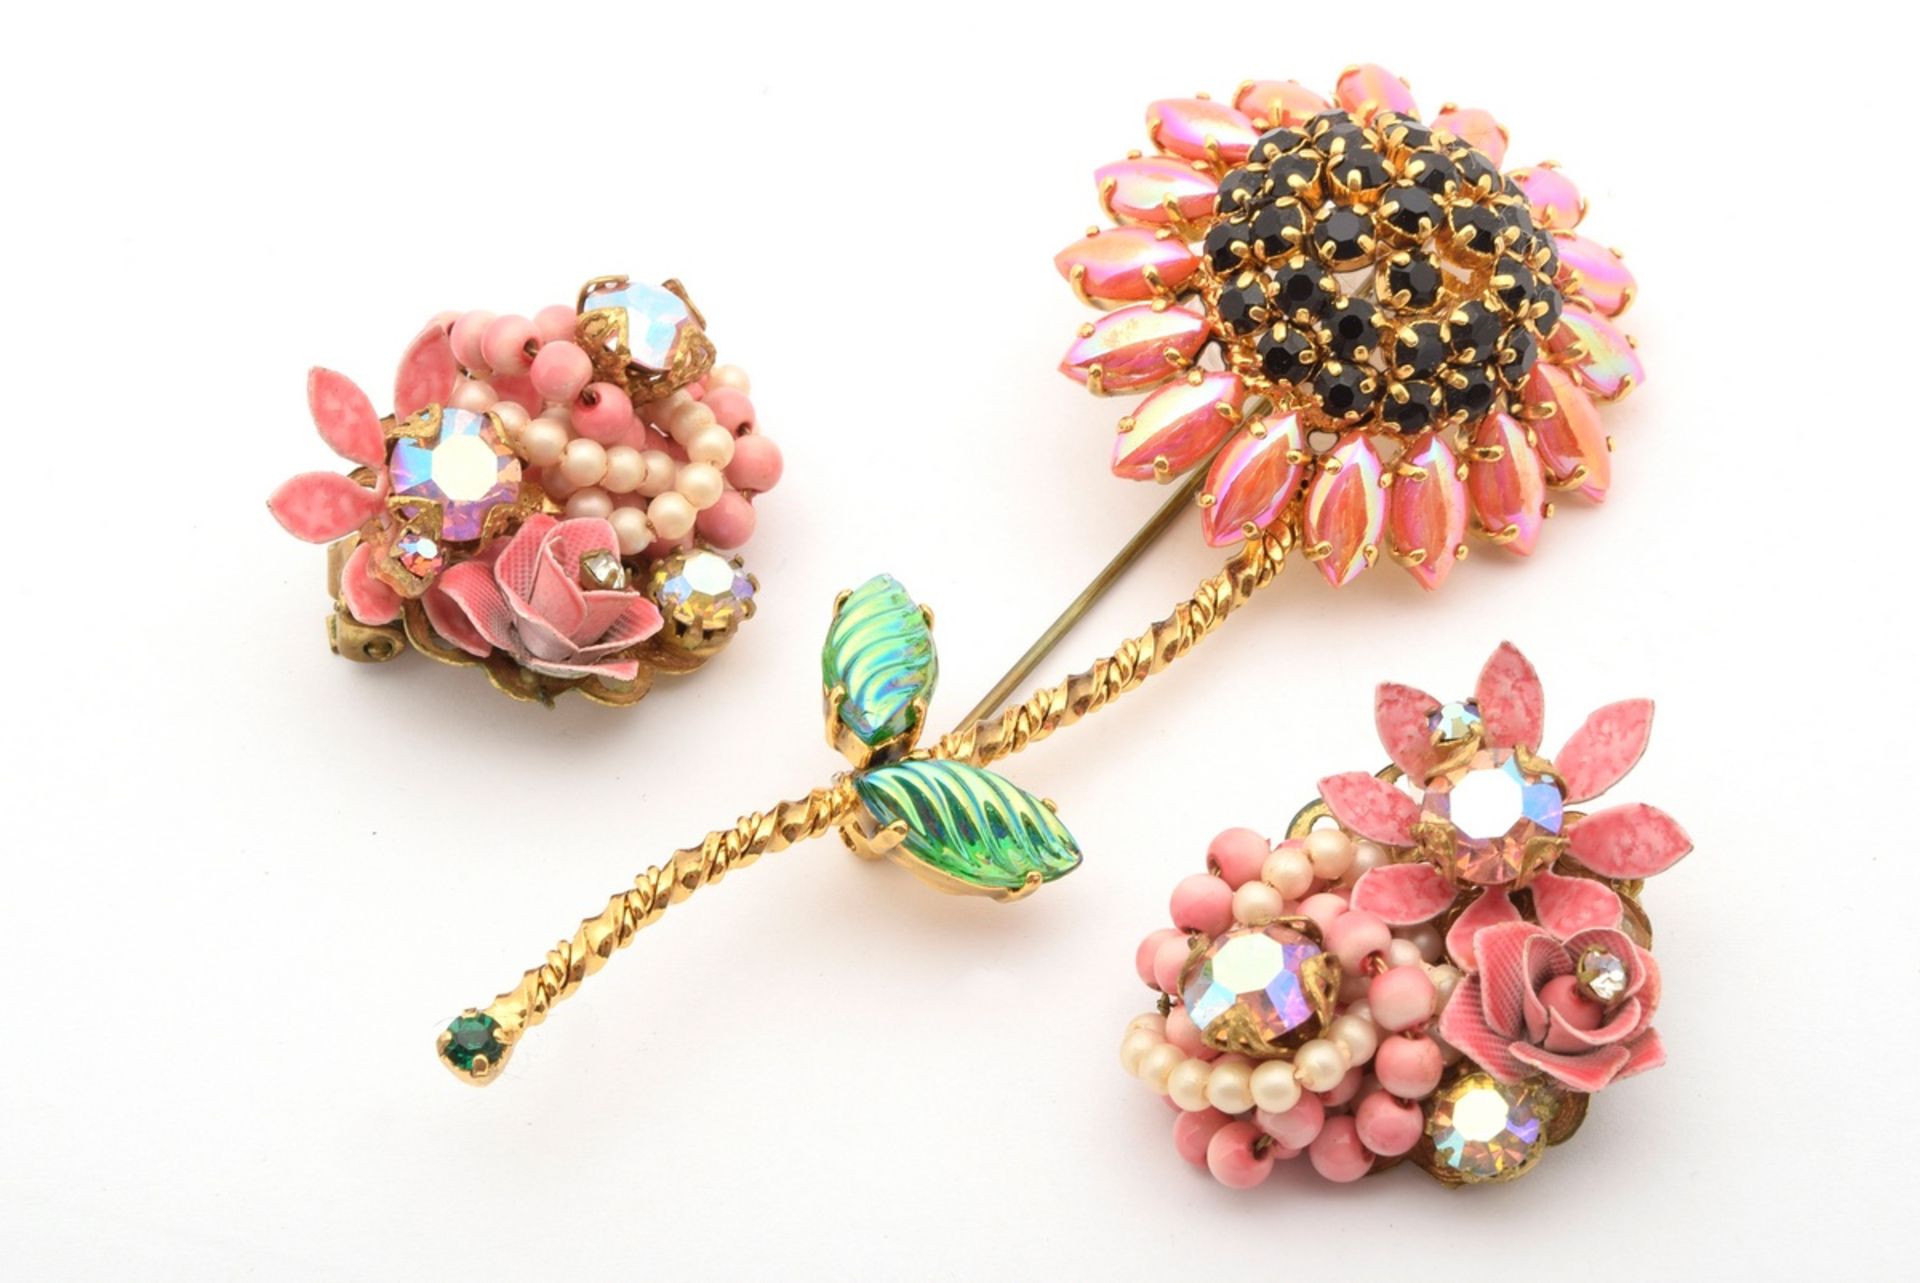 3 pieces of gold-plated vintage costume jewellery with artificial pearls, rhinestones and enamel: 1